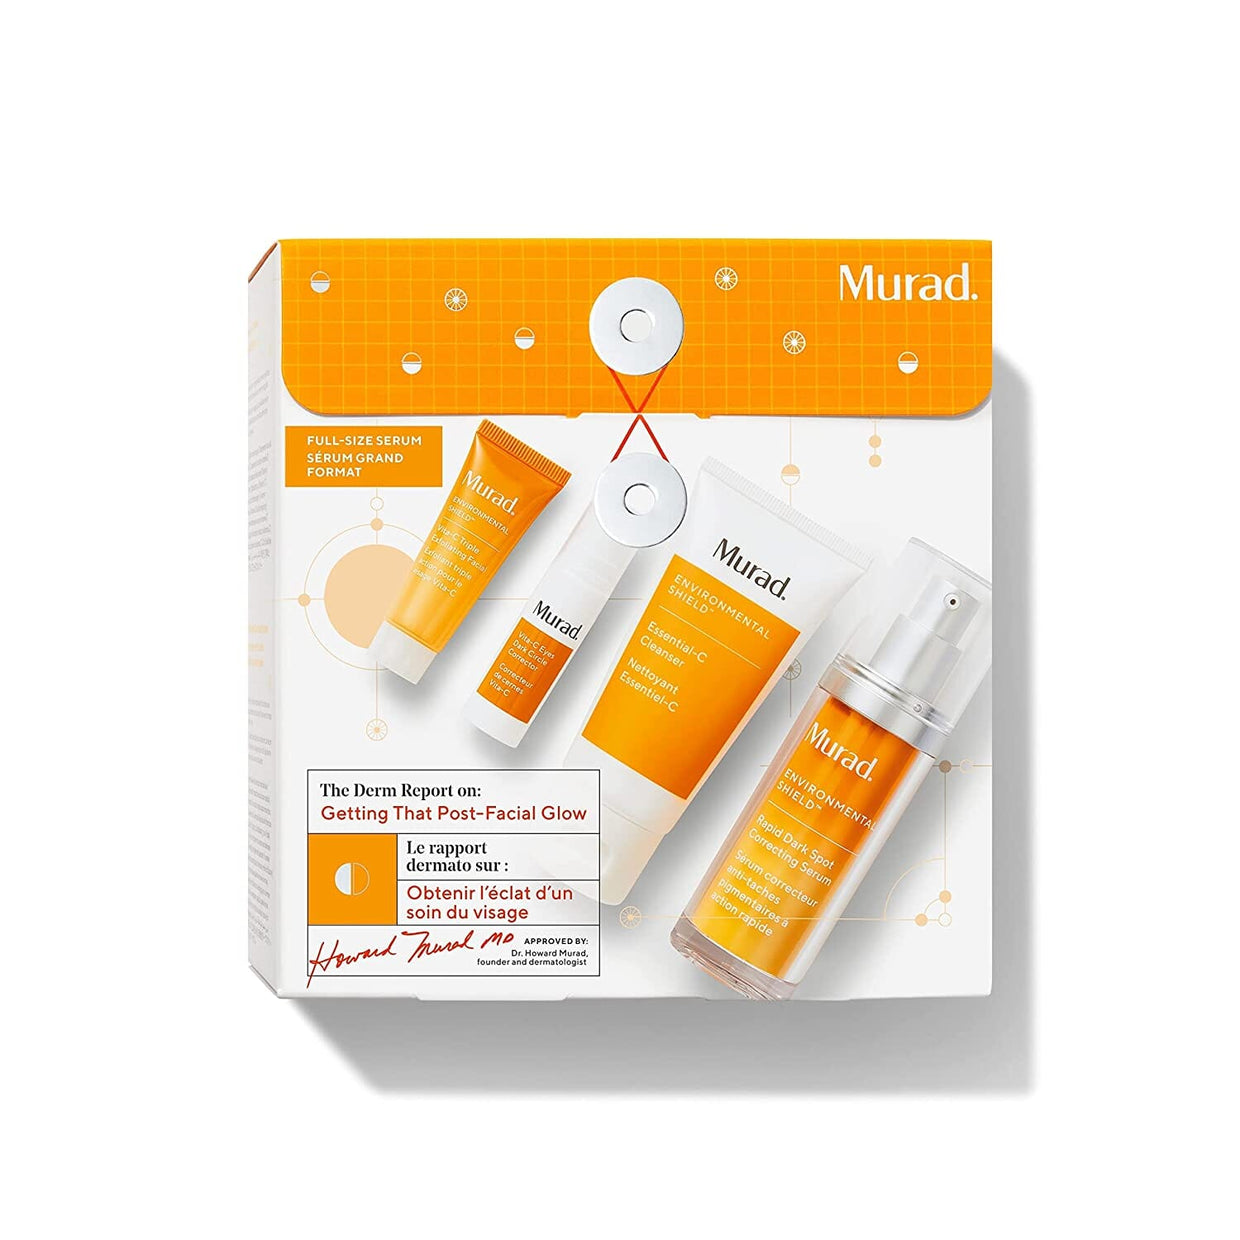 Murad The Derm Report On: Getting the Post Facial Glow Murad Shop at Exclusive Beauty Club